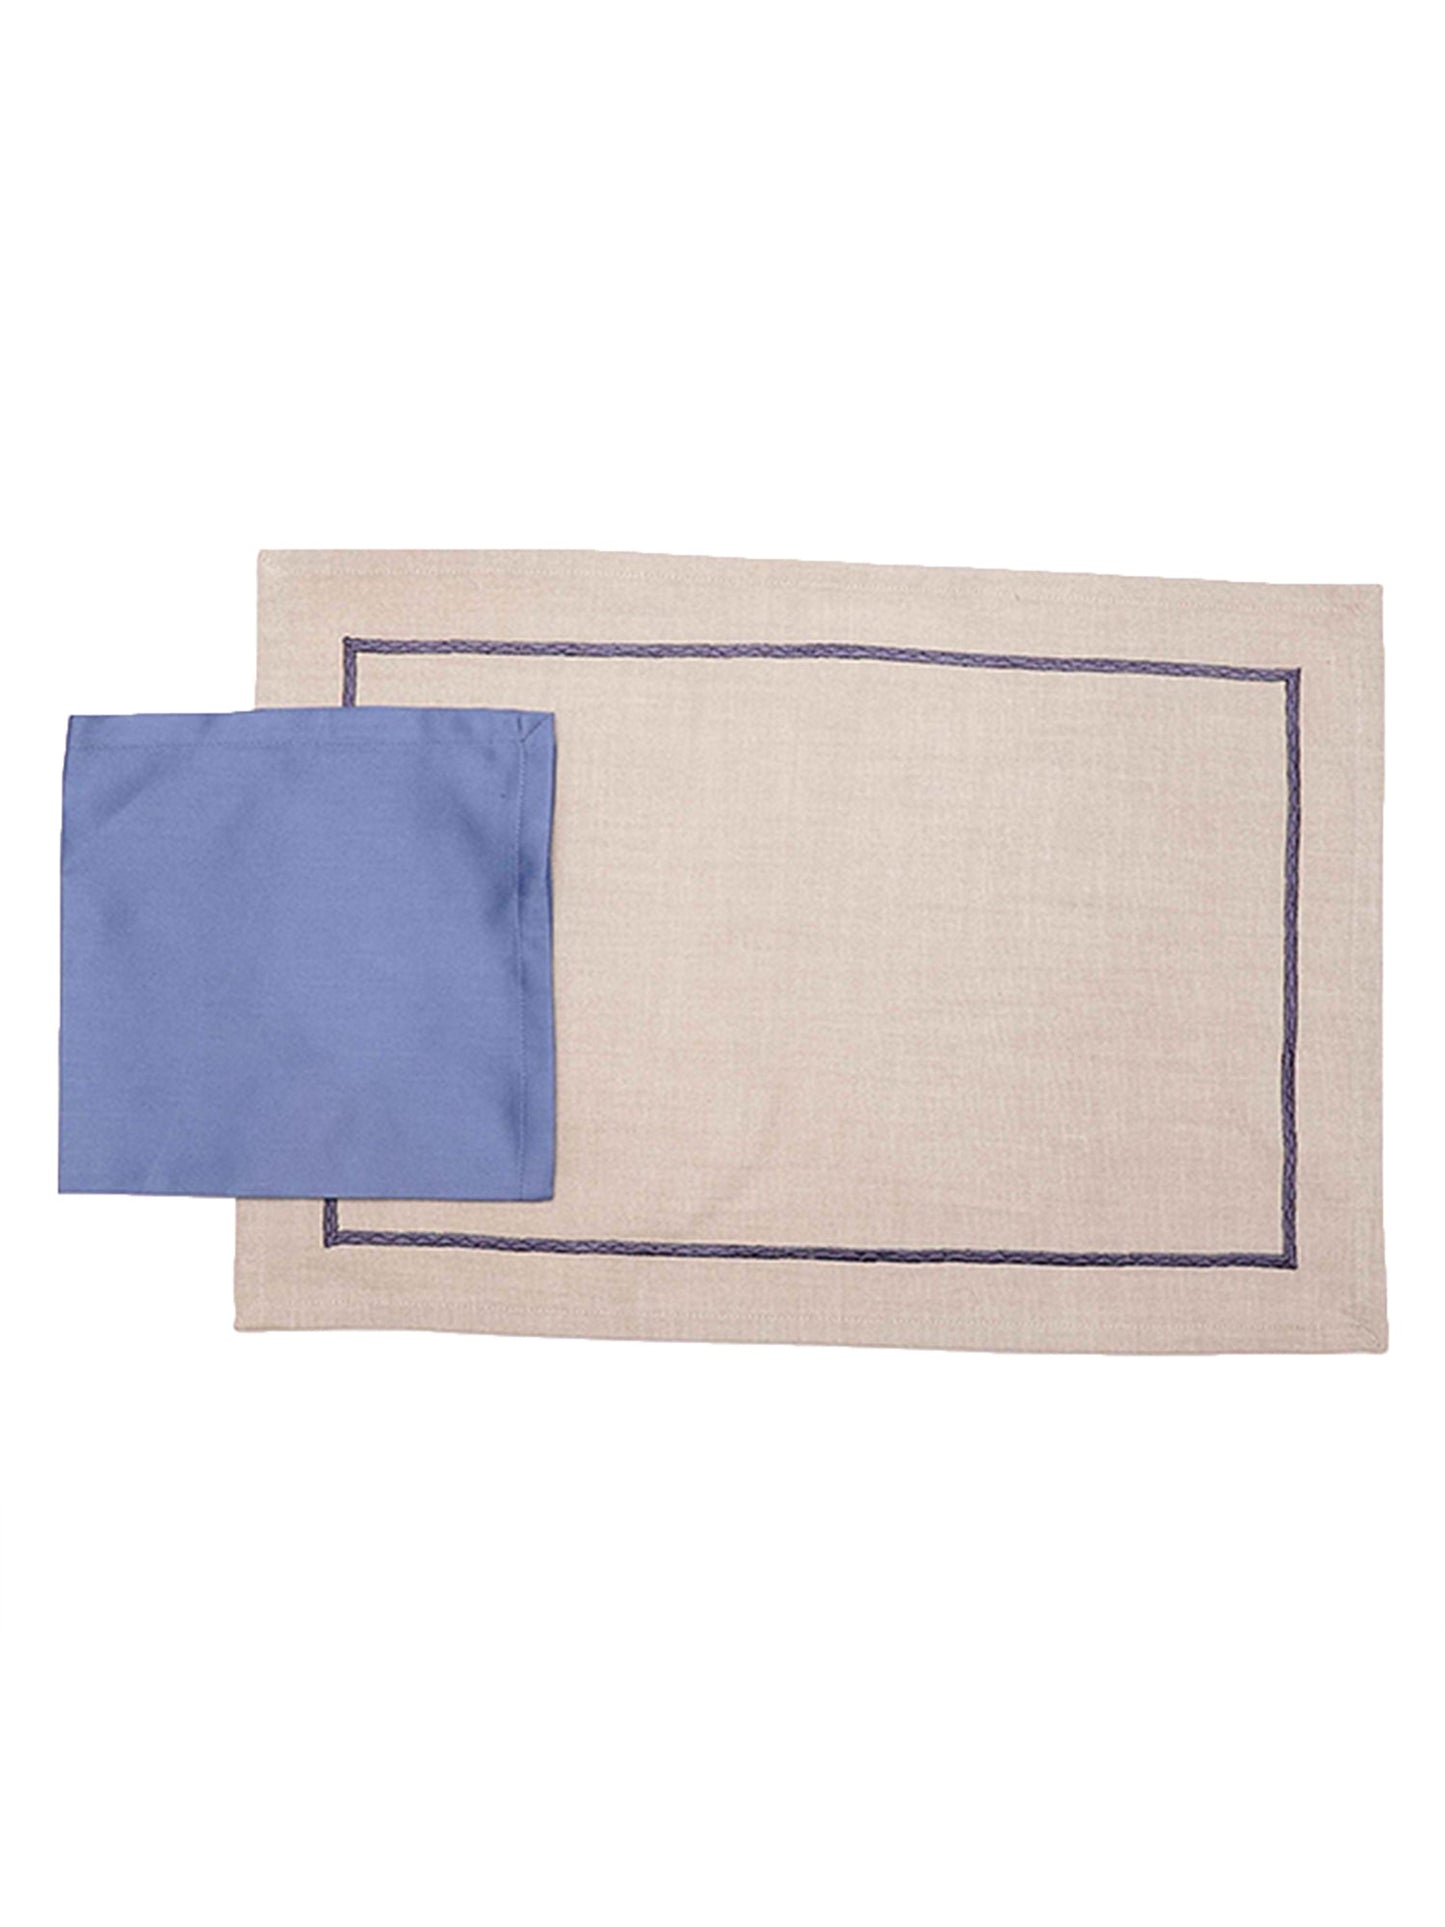 Table Mats and Napkins  100% Cotton Self Textured Blue and Beige - 13" x 19" ; 16" x 16" - Set of 6